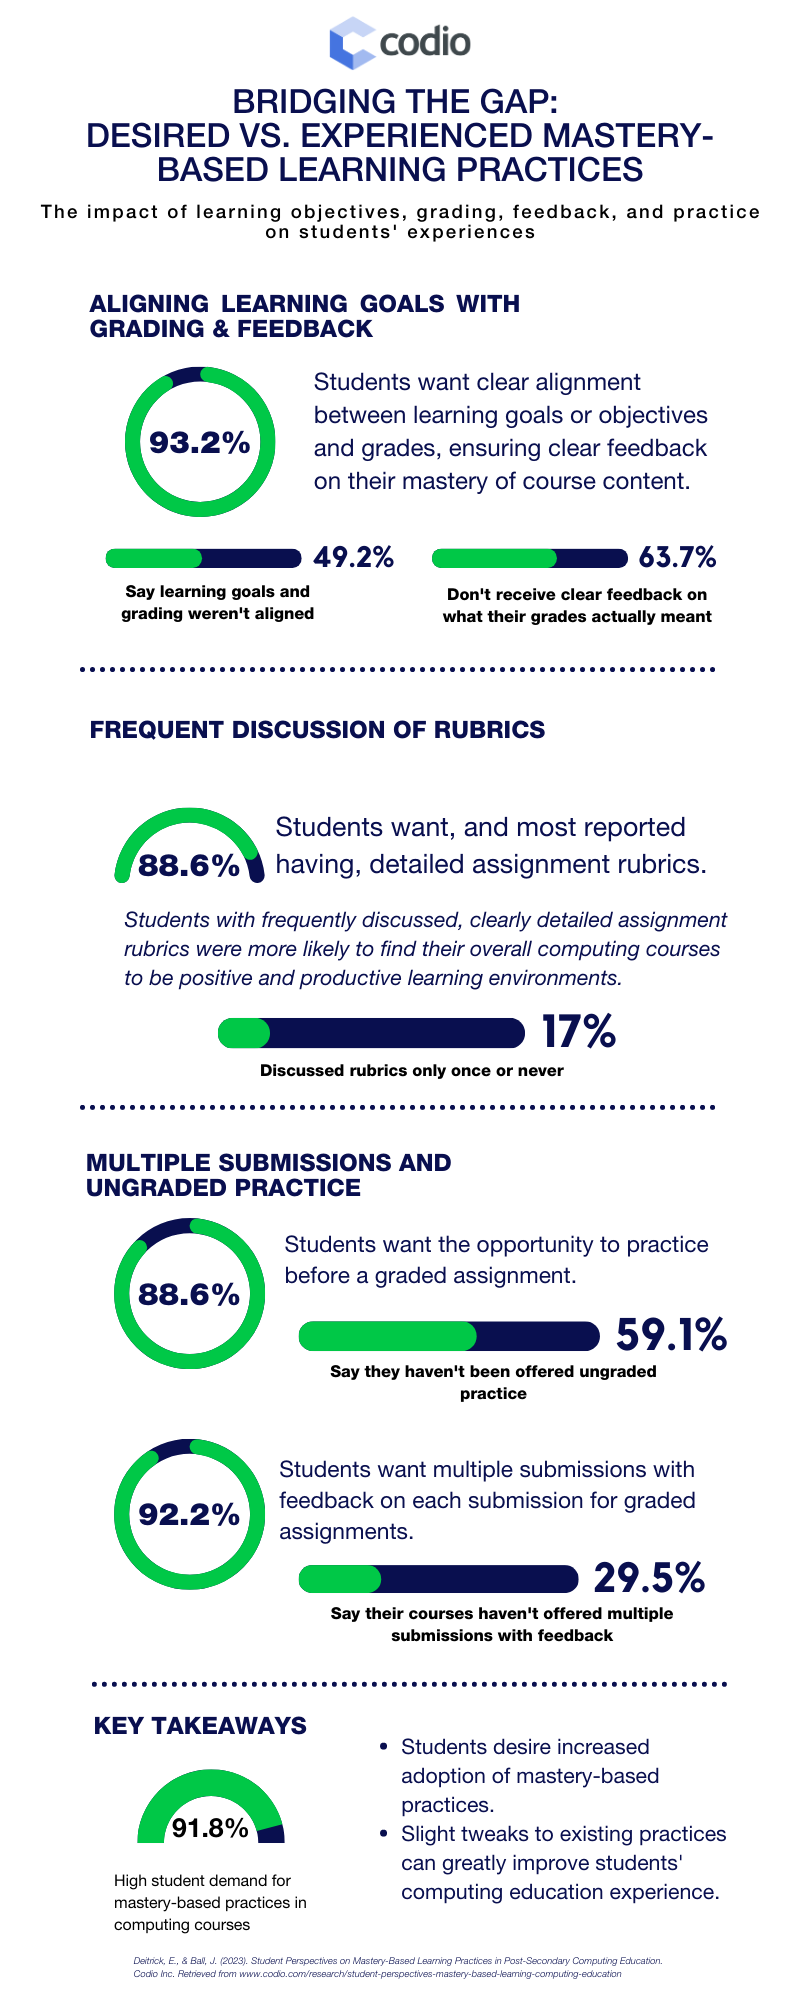 Infographic displaying mastery based learning practices computing students want, like ungraded practice and instant feedback, along with frequently discussed rubrics.